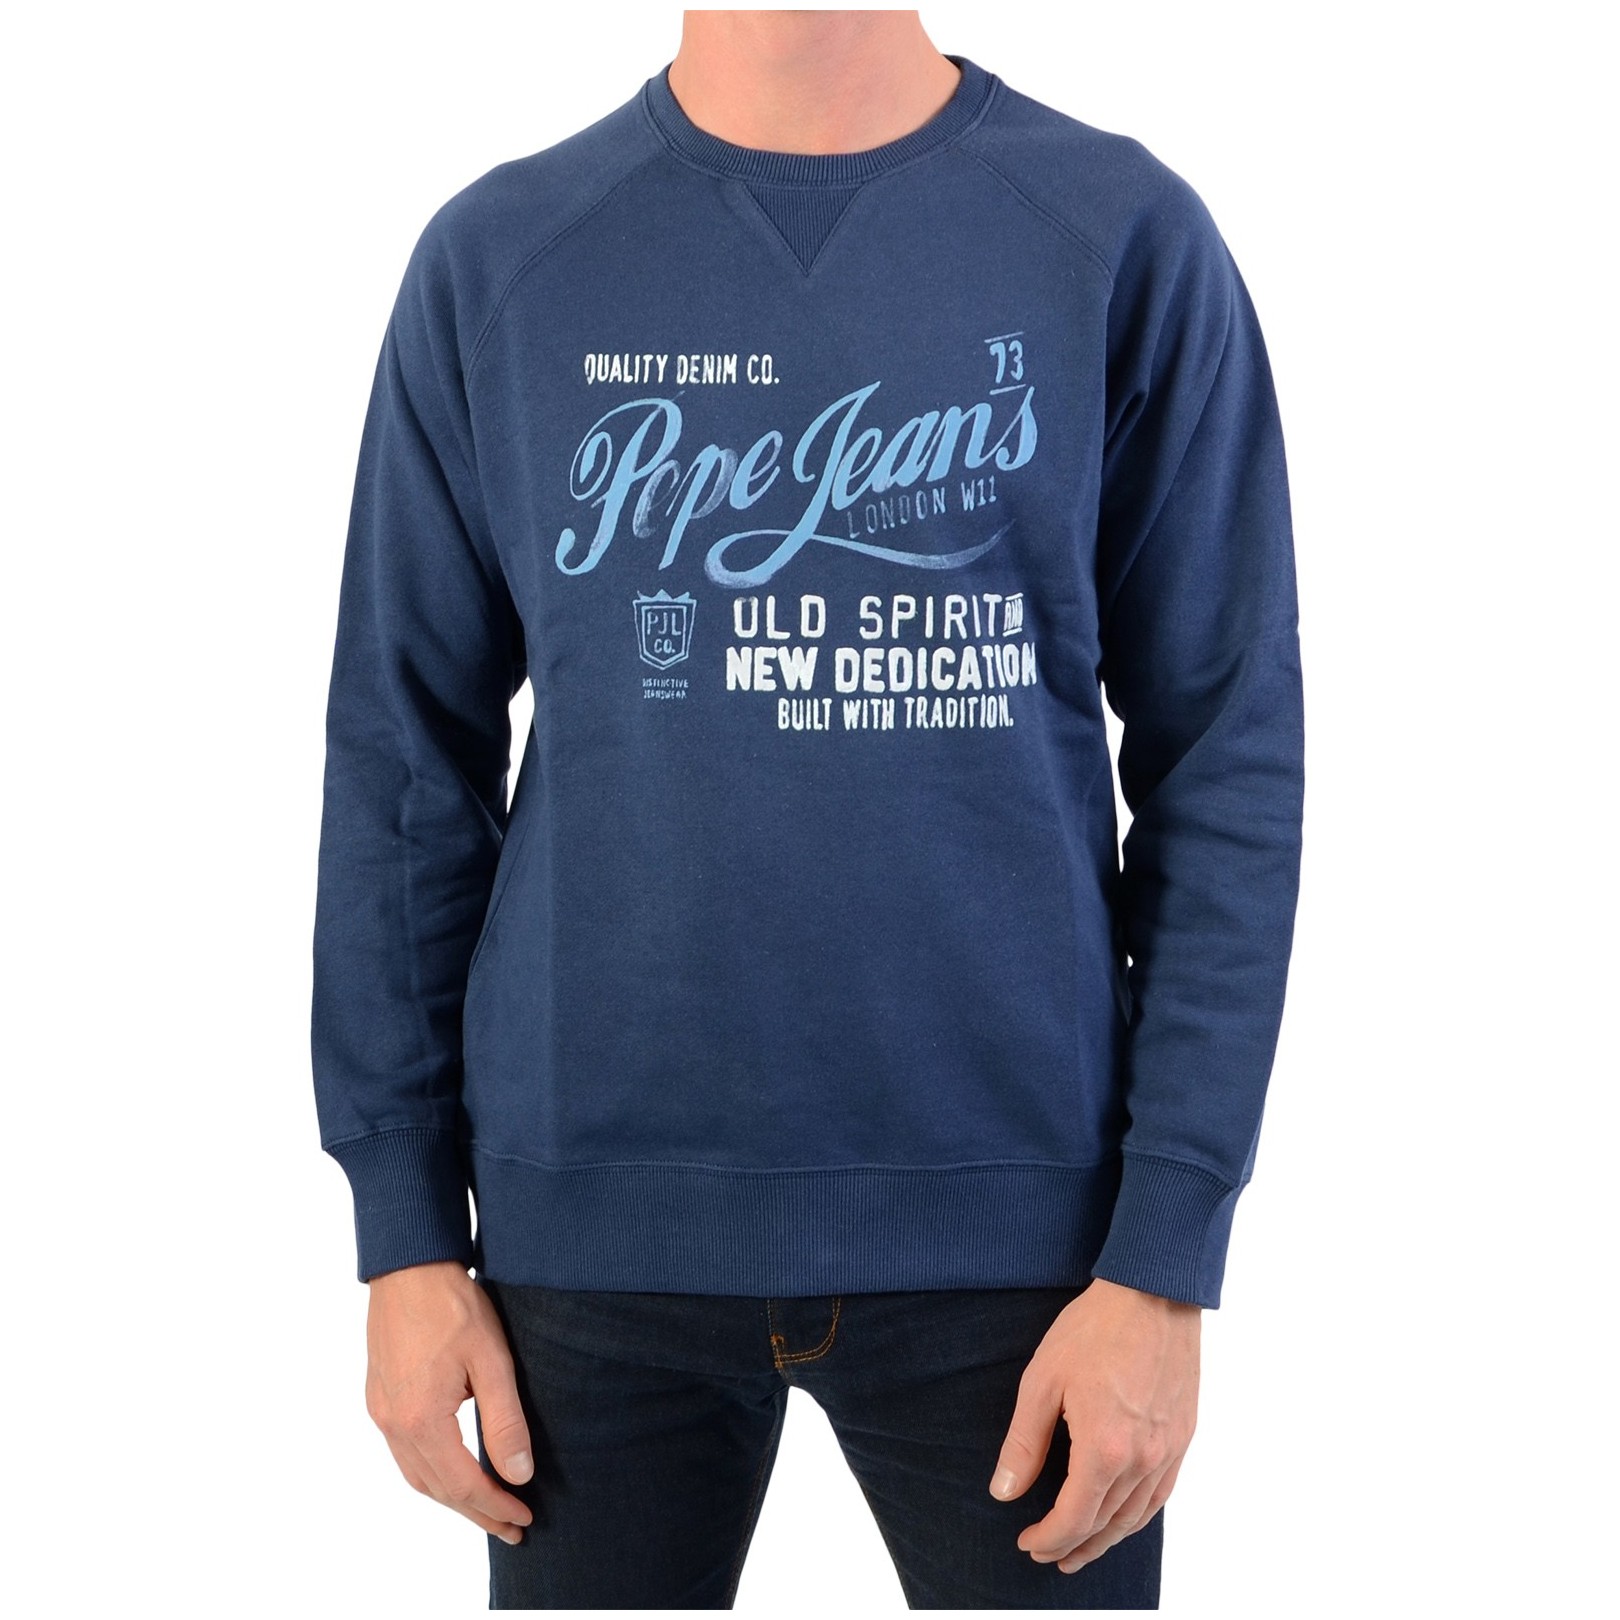 Pull Pepe Jeans Mohsen